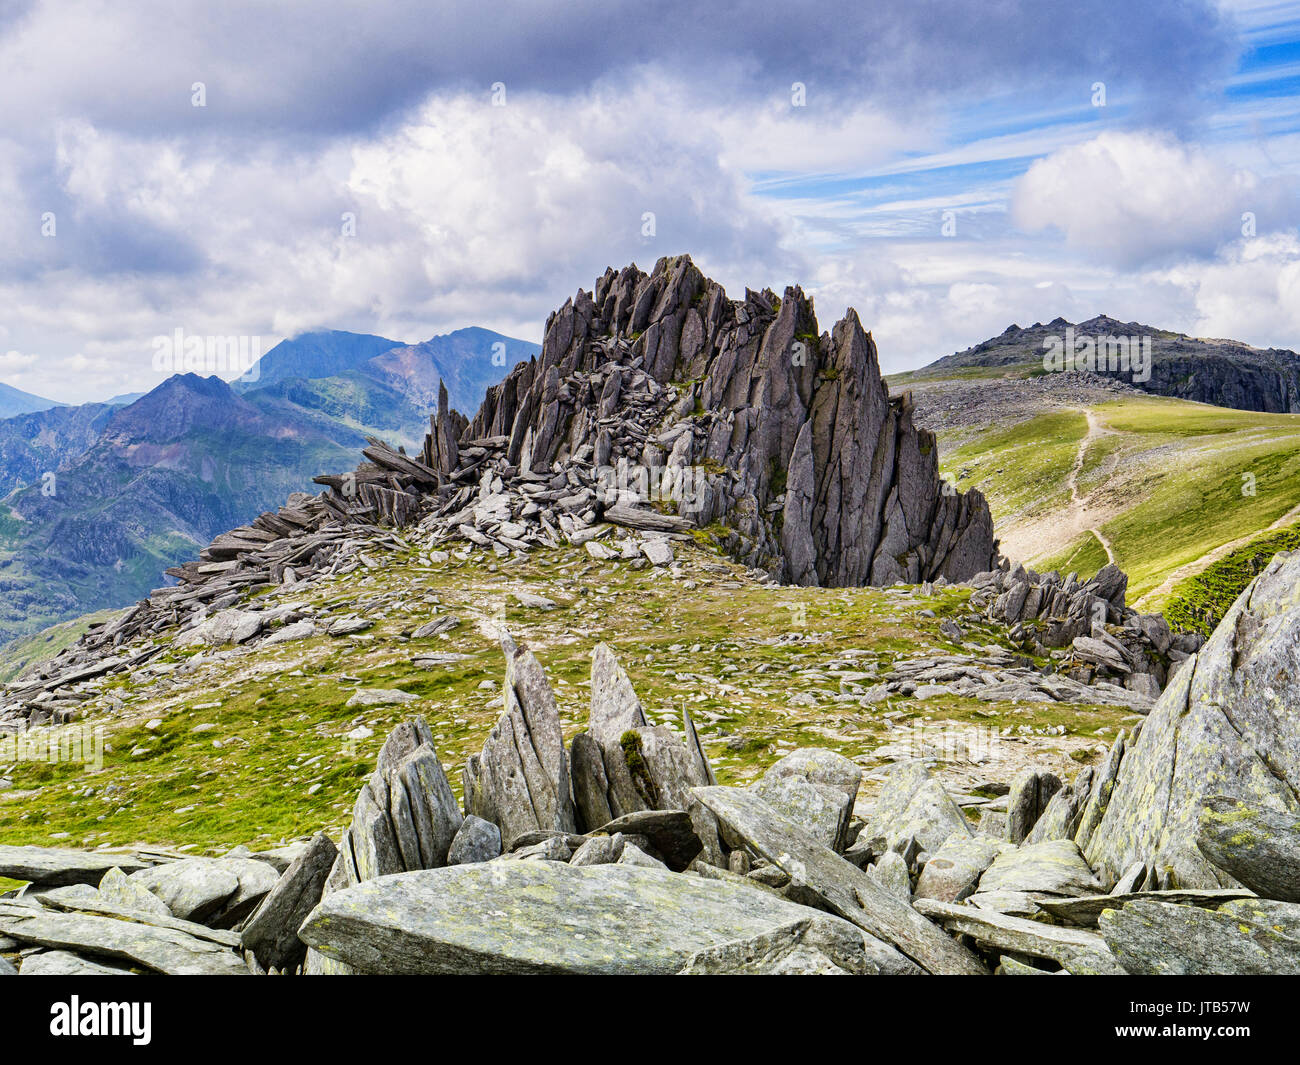 Castle of the Winds, Castell y Gwynt, the famous summit on the Glyders ridge, Snowdonia National Park, North Wales, UK. Stock Photo